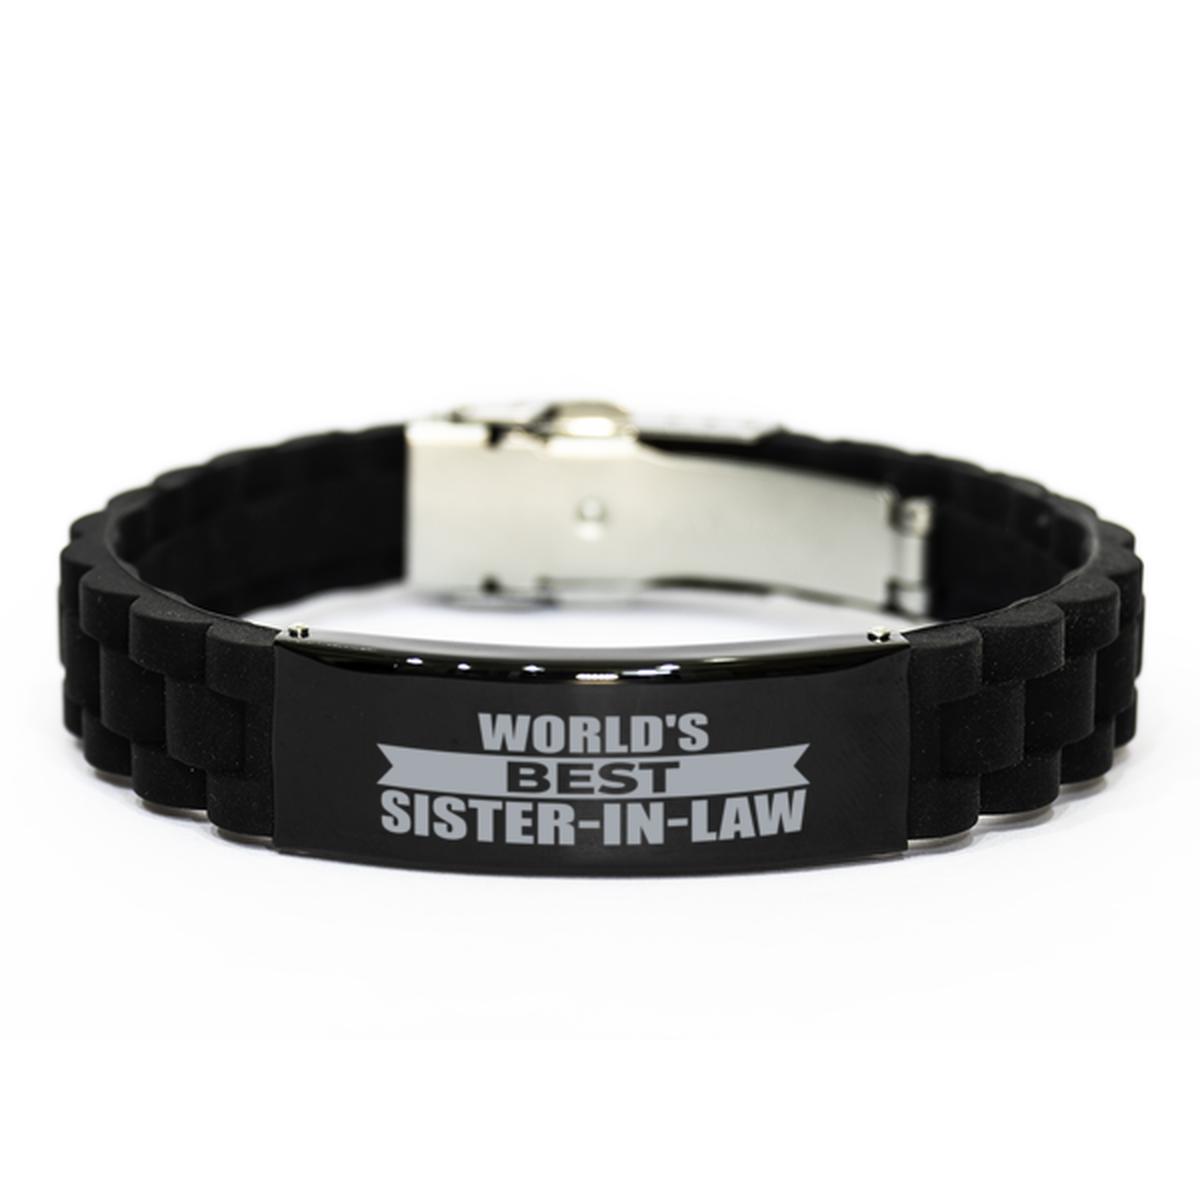 World's Best Sister-in-law Gifts, Funny Black Engraved Bracelet For Sister-in-law, Family Gifts For Women